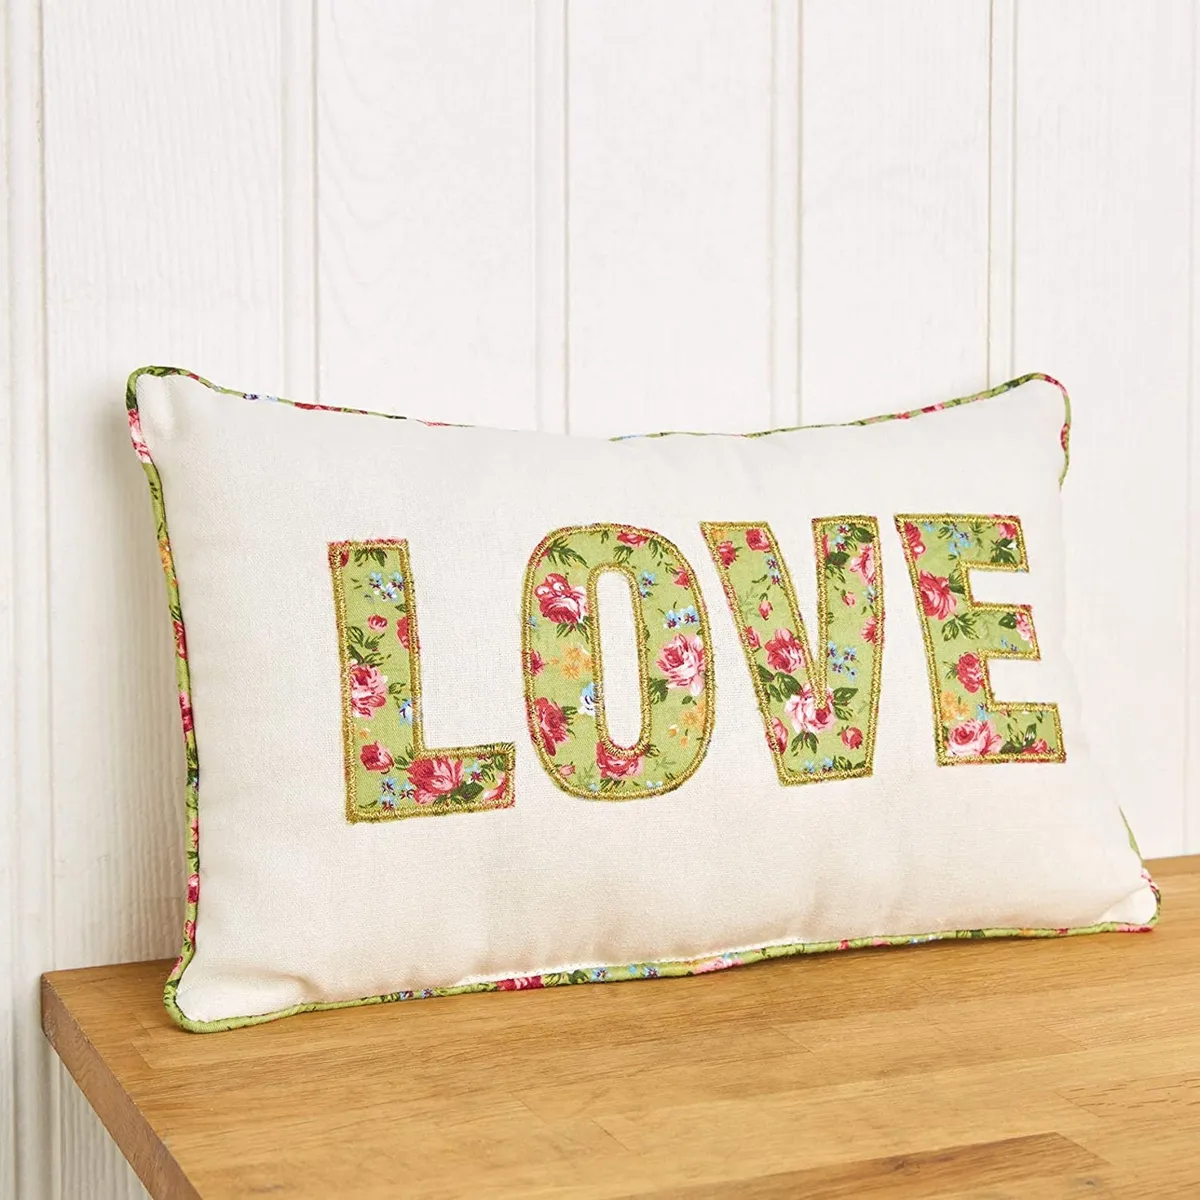 Love how to sew a cushion kit